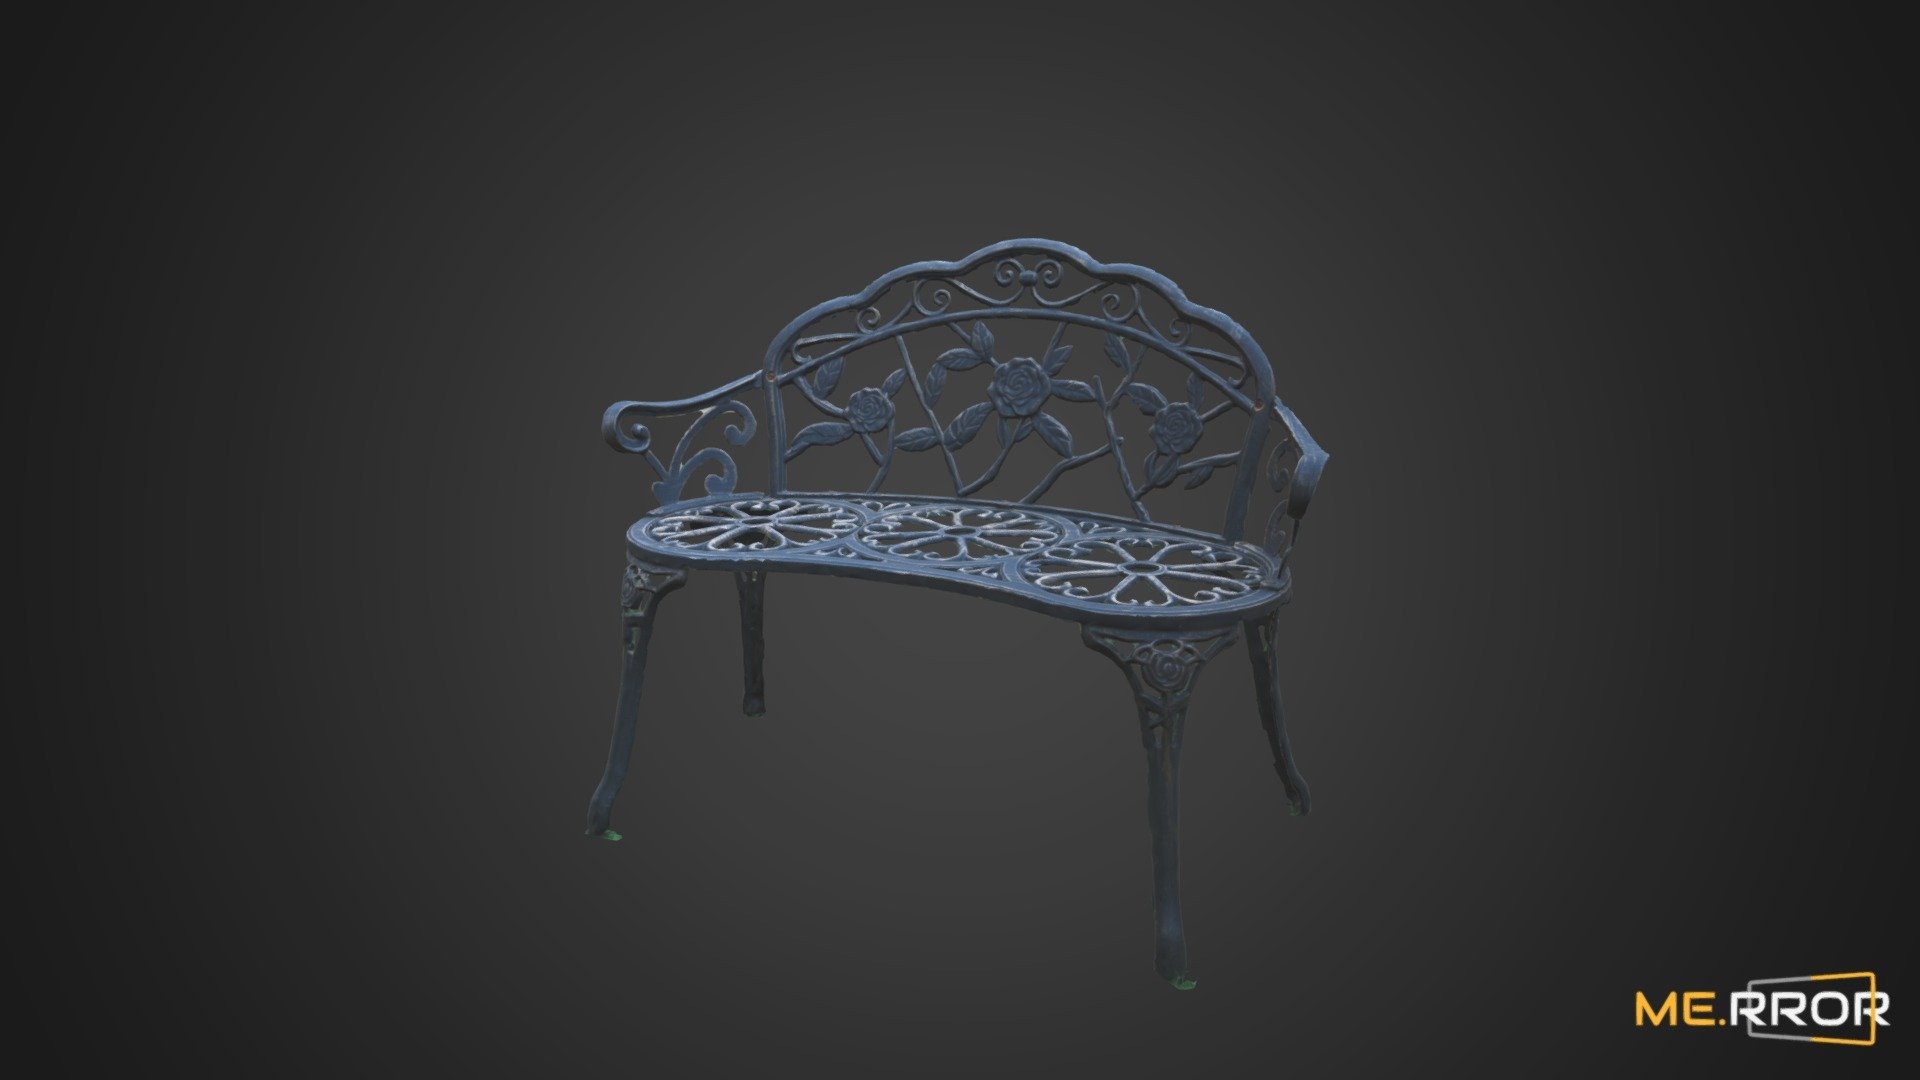 MERROR is a 3D Content PLATFORM which introduces various Asian assets to the 3D world


3DScanning #Photogrametry #ME.RROR - Steel Chair2 - Buy Royalty Free 3D model by ME.RROR (@merror) 3d model